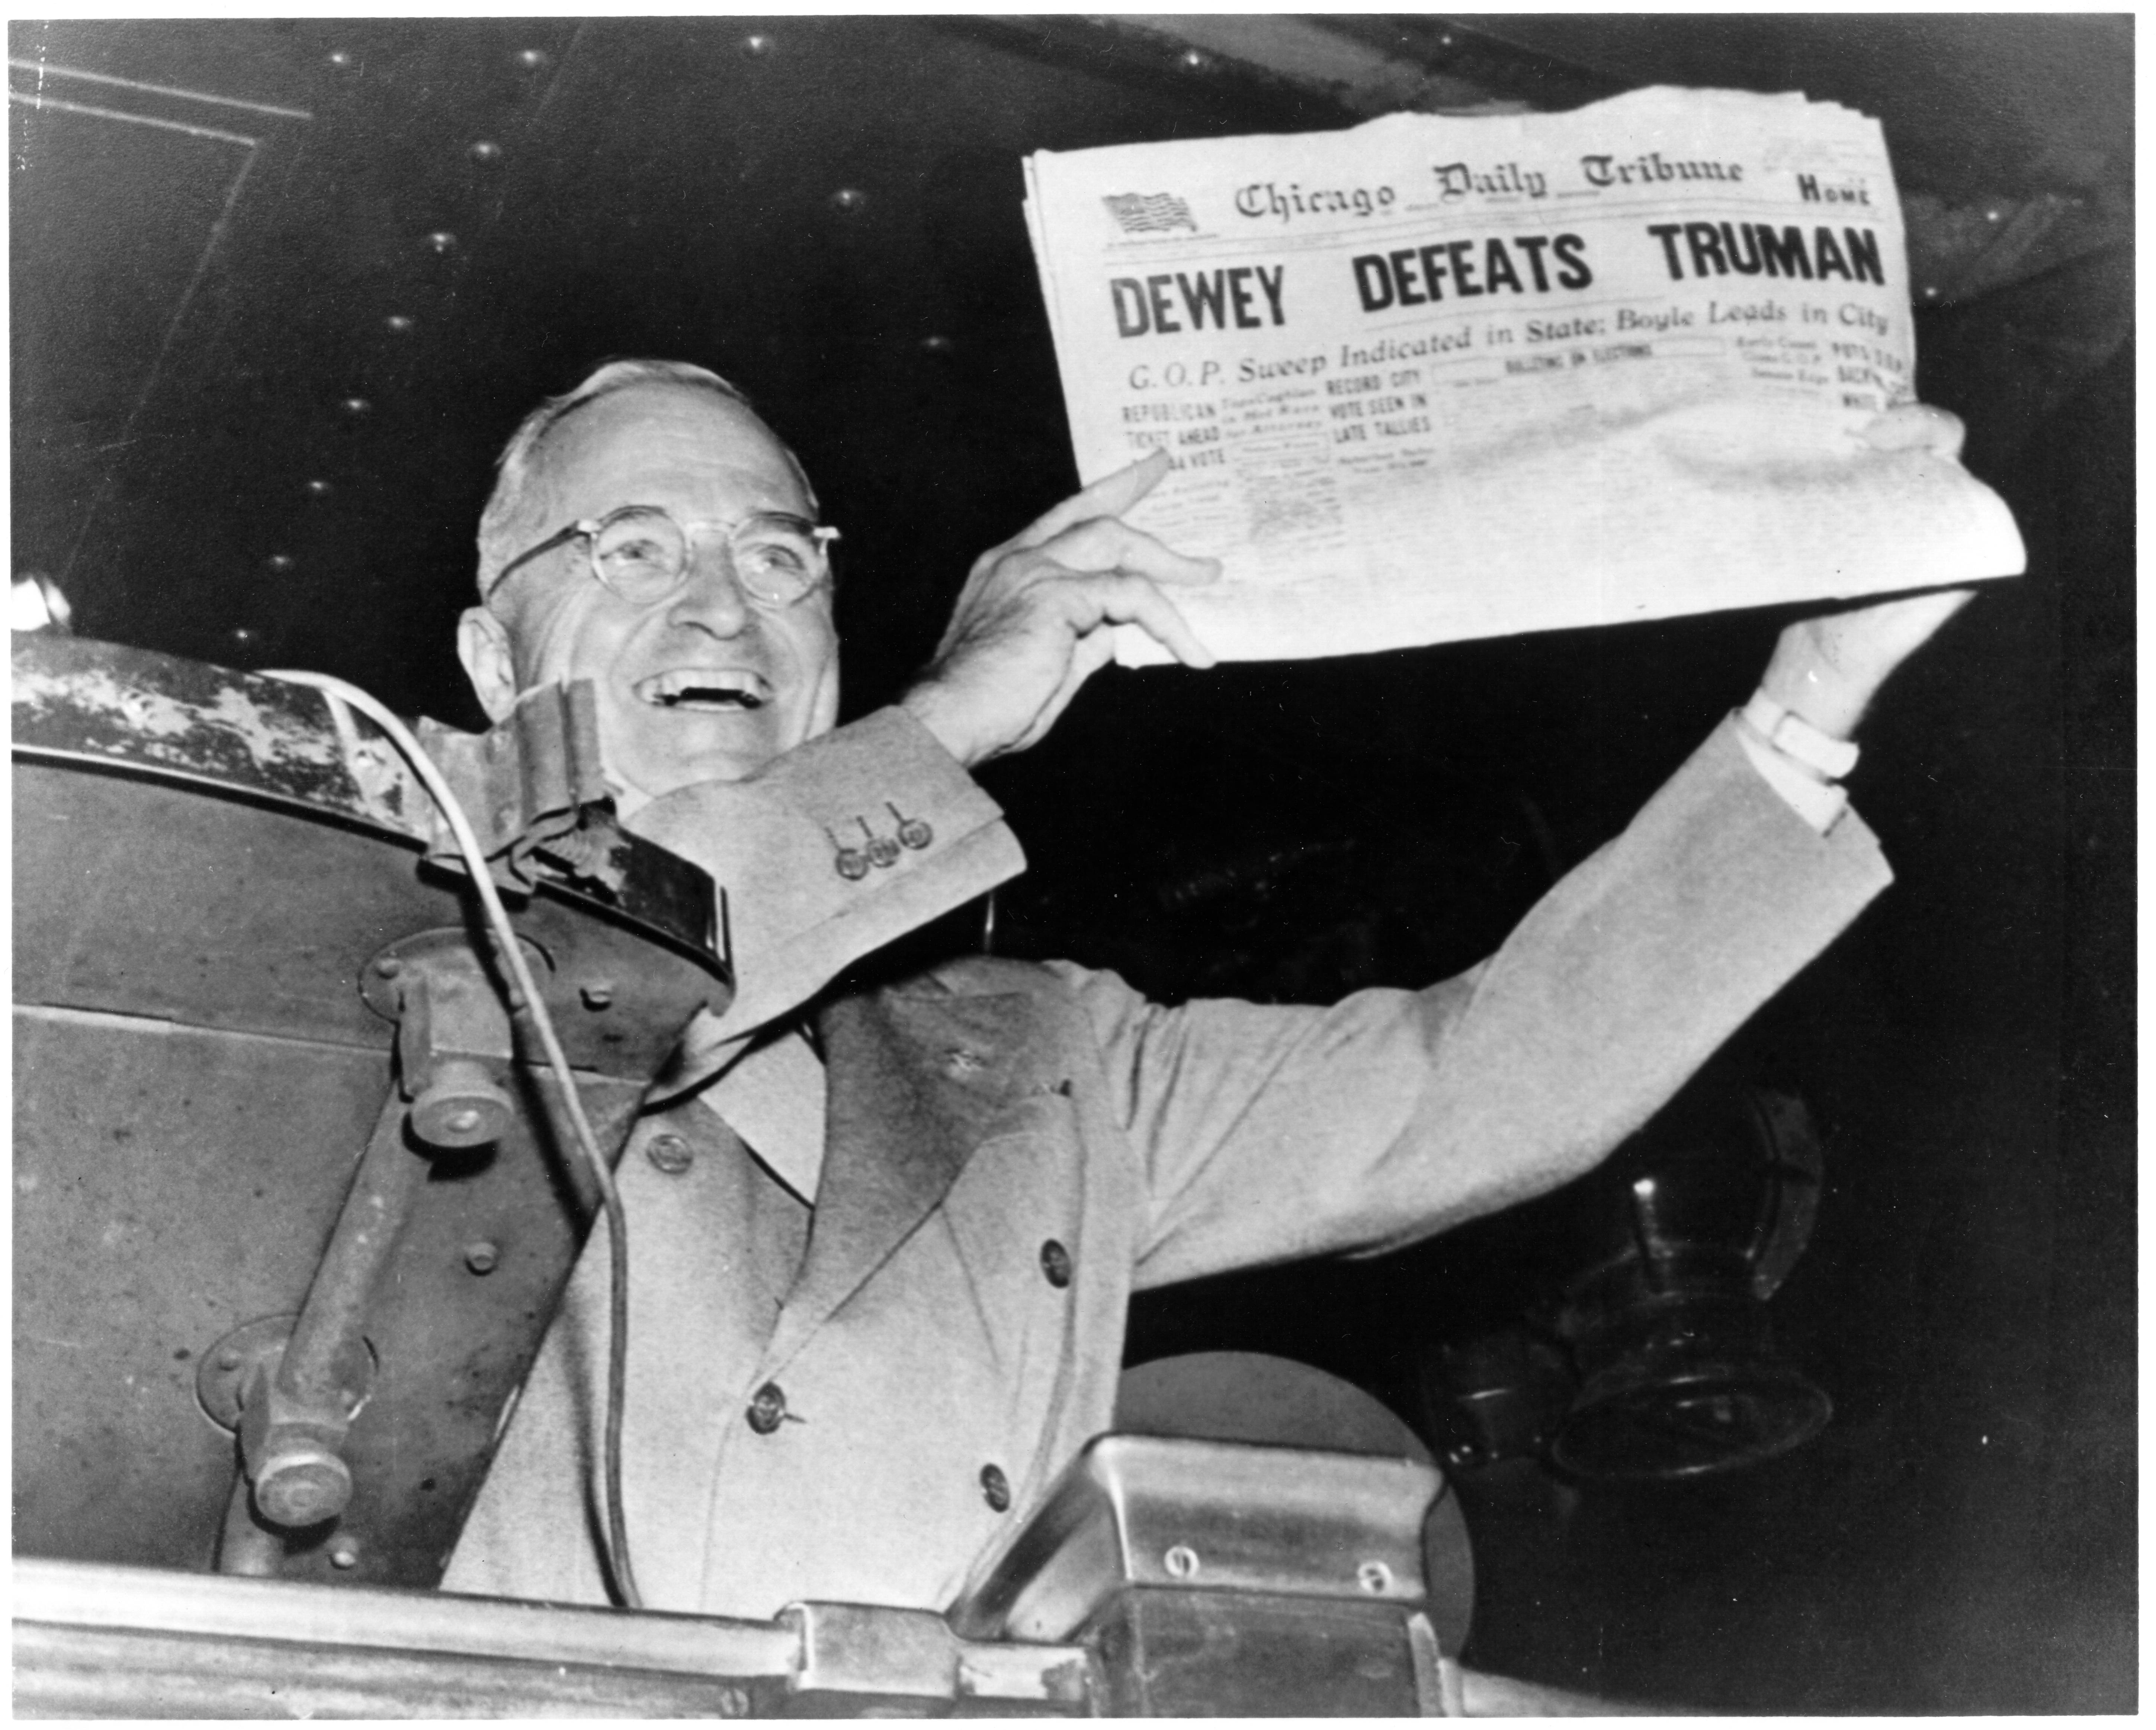 President Truman holds up Chicago Tribune with headline "Dewey Defeats Truman" at train station in St. Louis, Mo, Nov. 4, 1948.